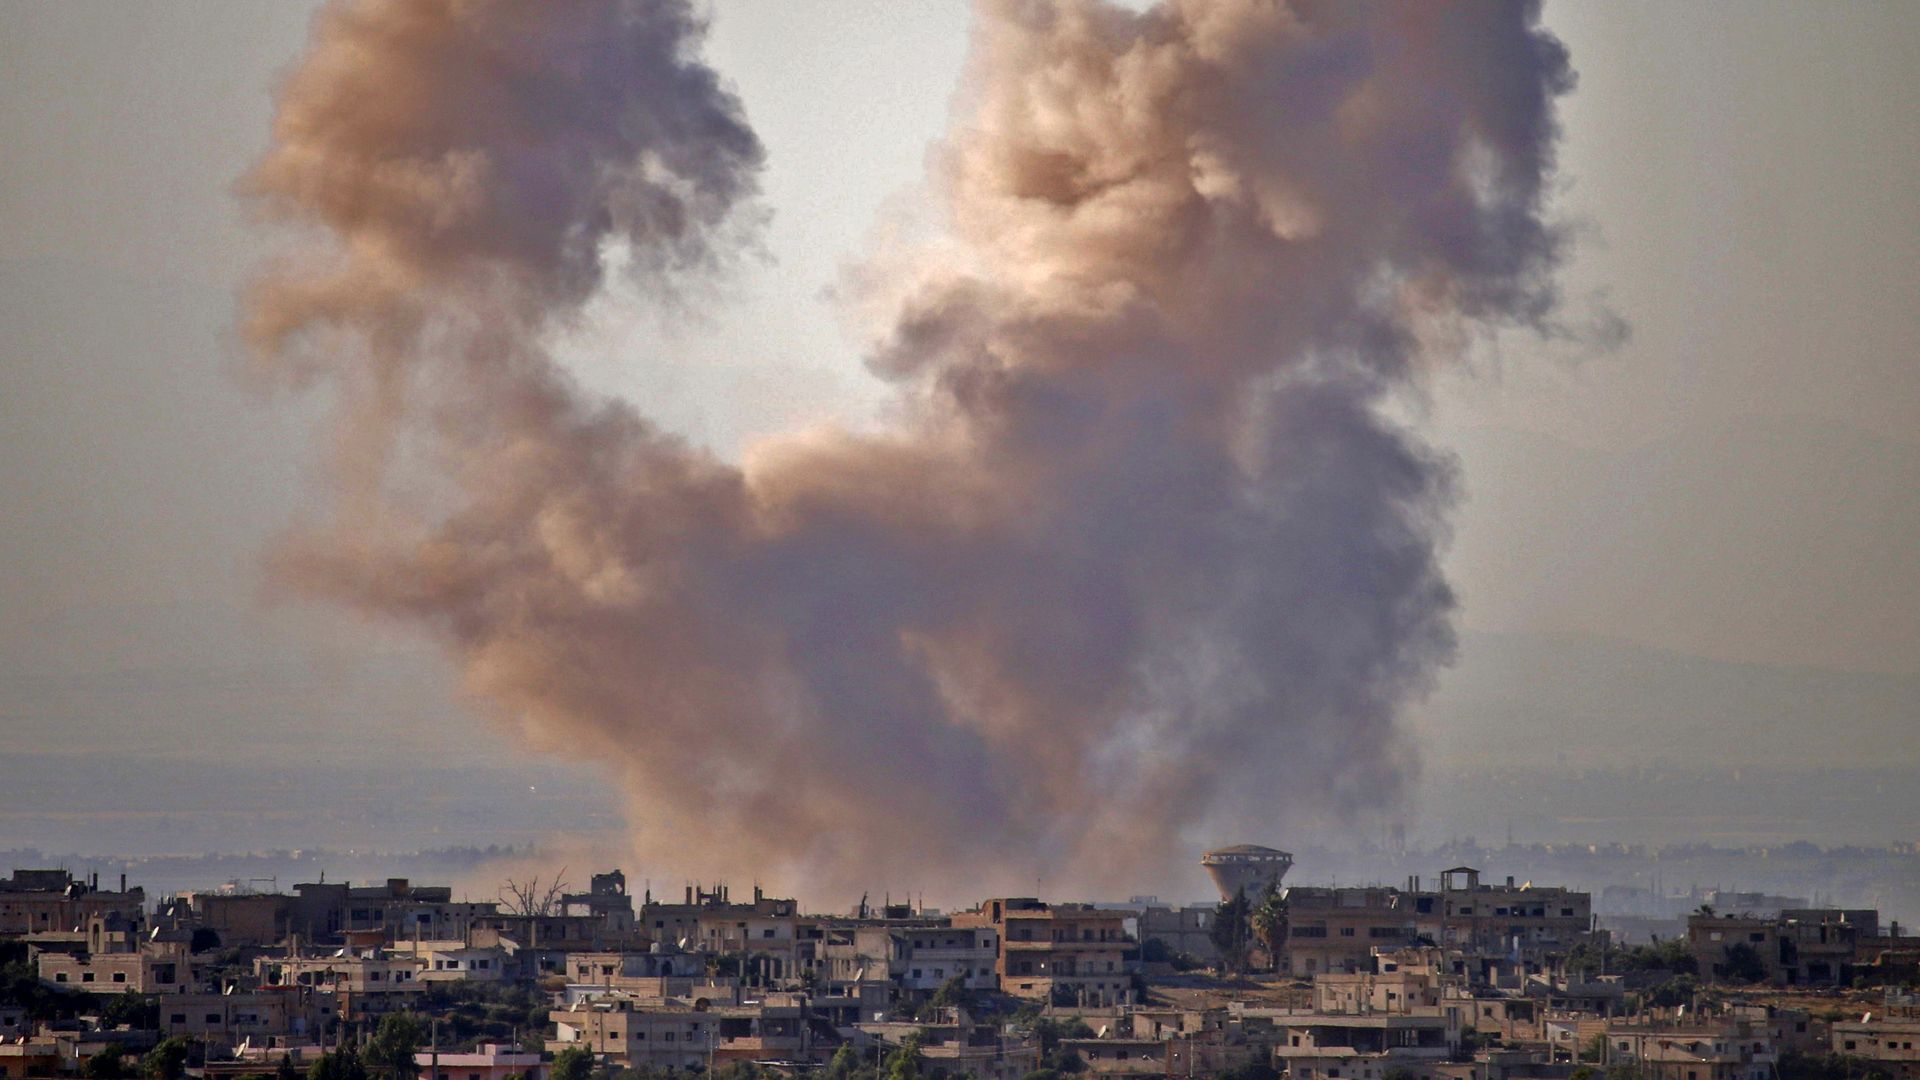 smoke rising over town of Daraa, Syria, after an airstrike